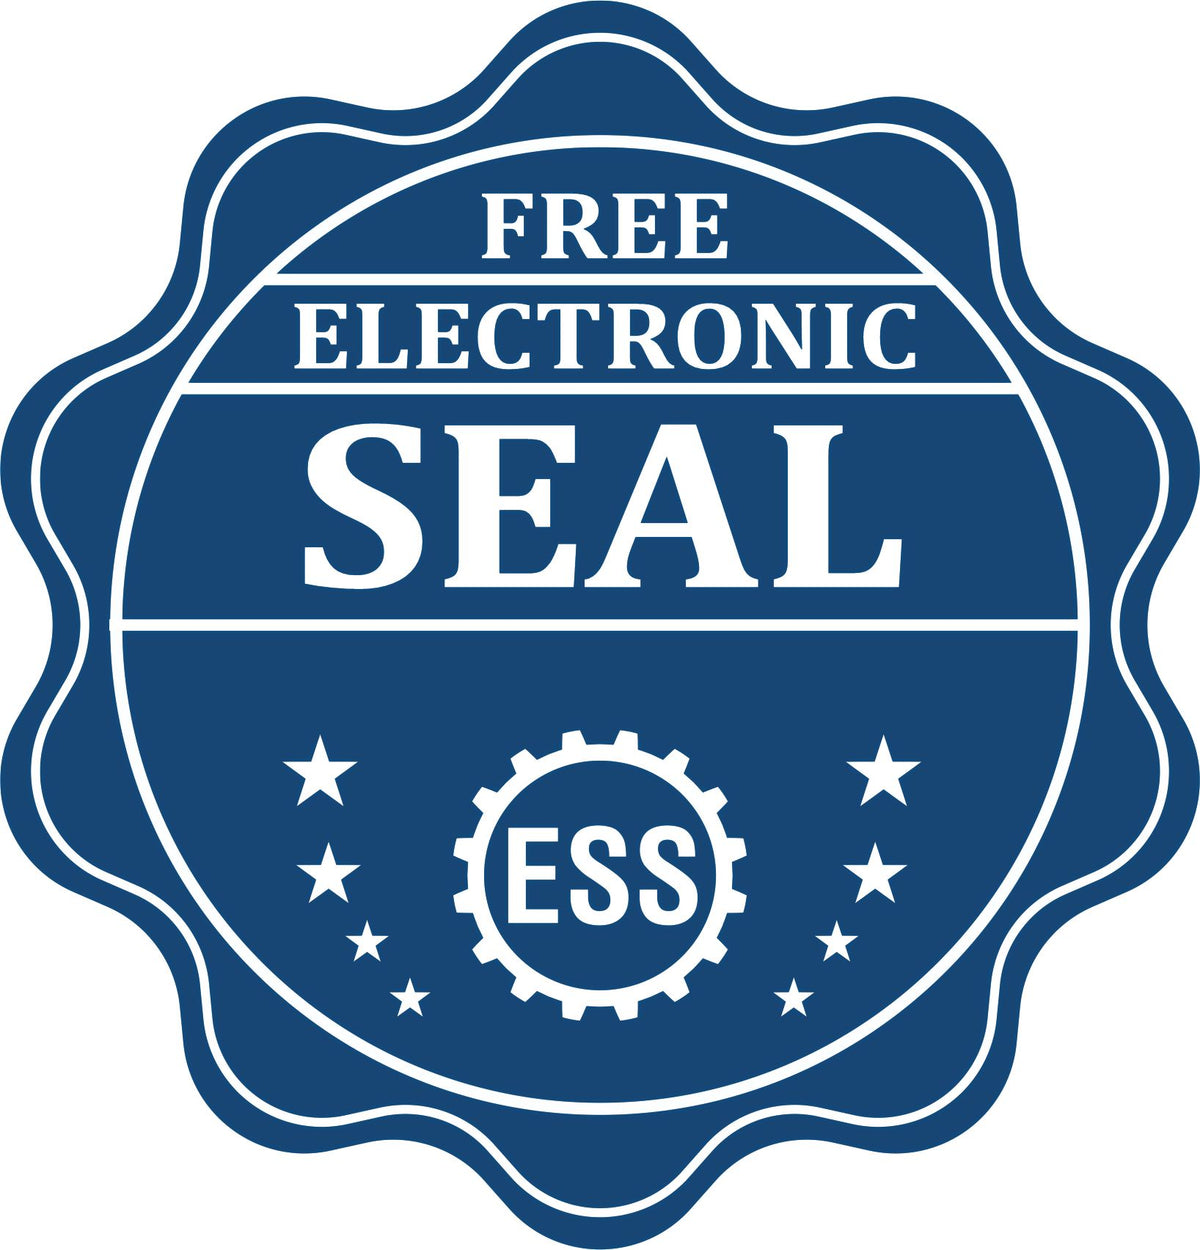 A badge showing a free electronic seal for the Gift Hawaii Geologist Seal with stars and the ESS gear on the emblem.